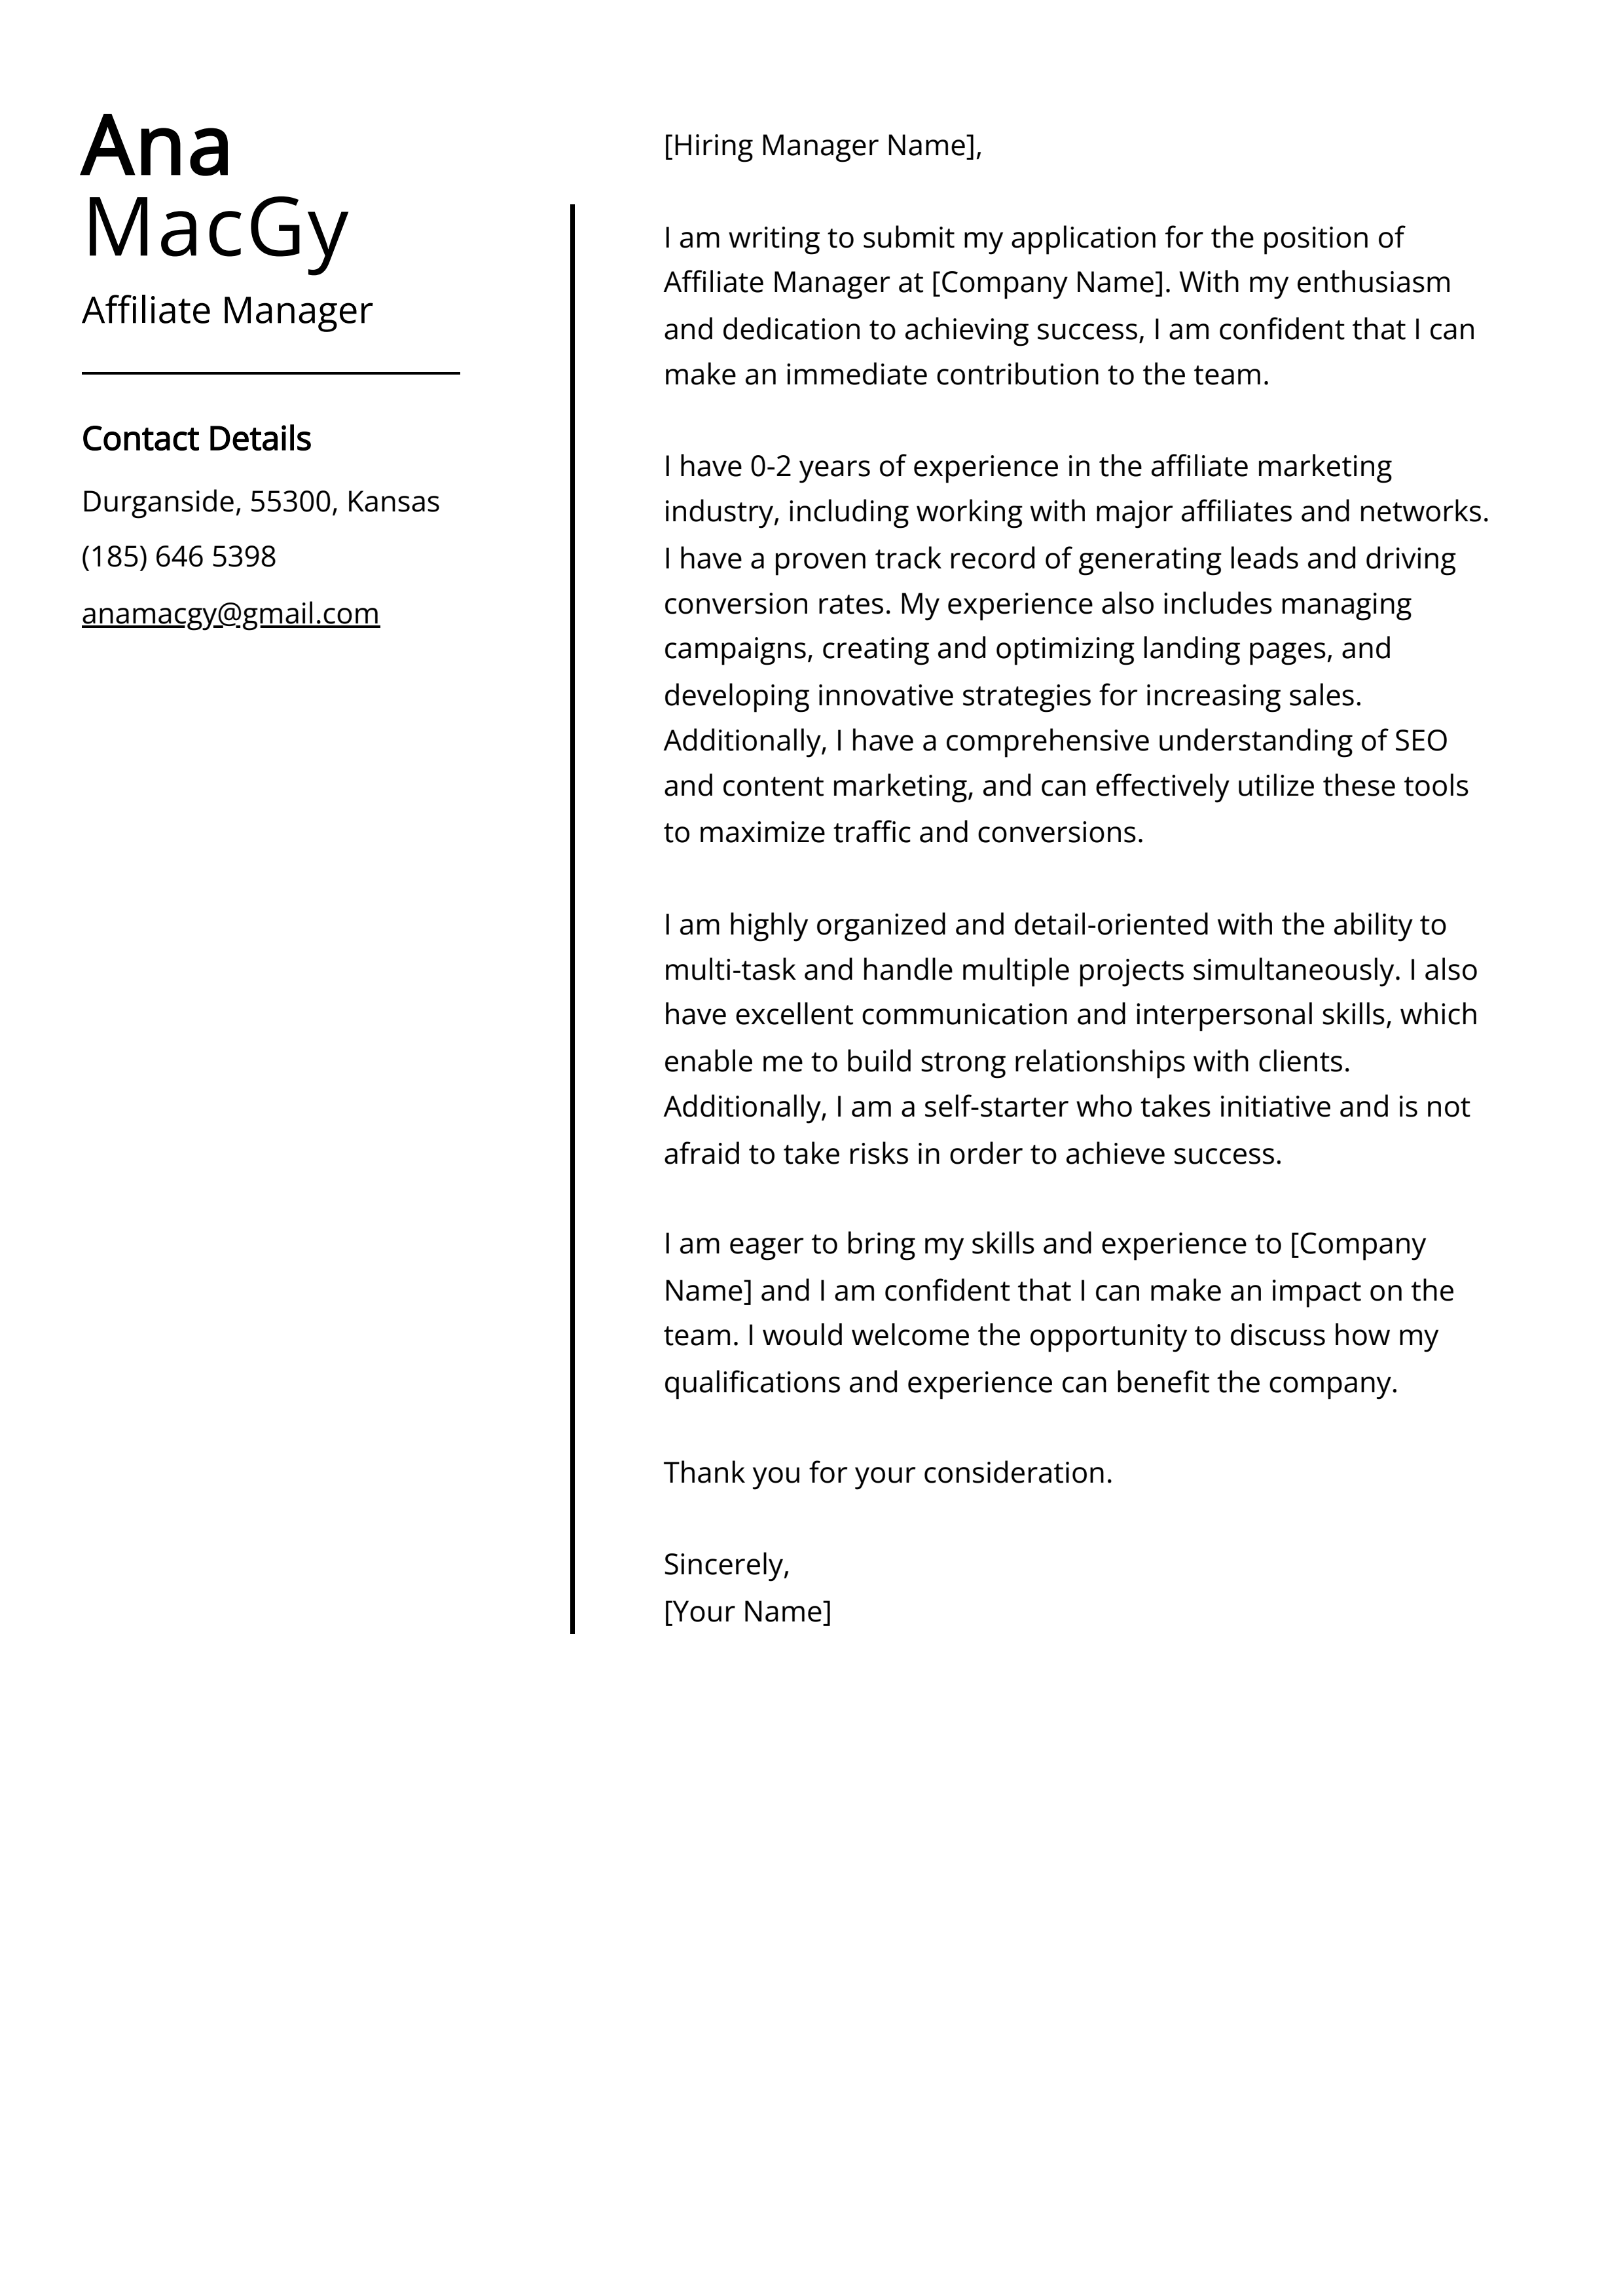 Affiliate Manager Cover Letter Example